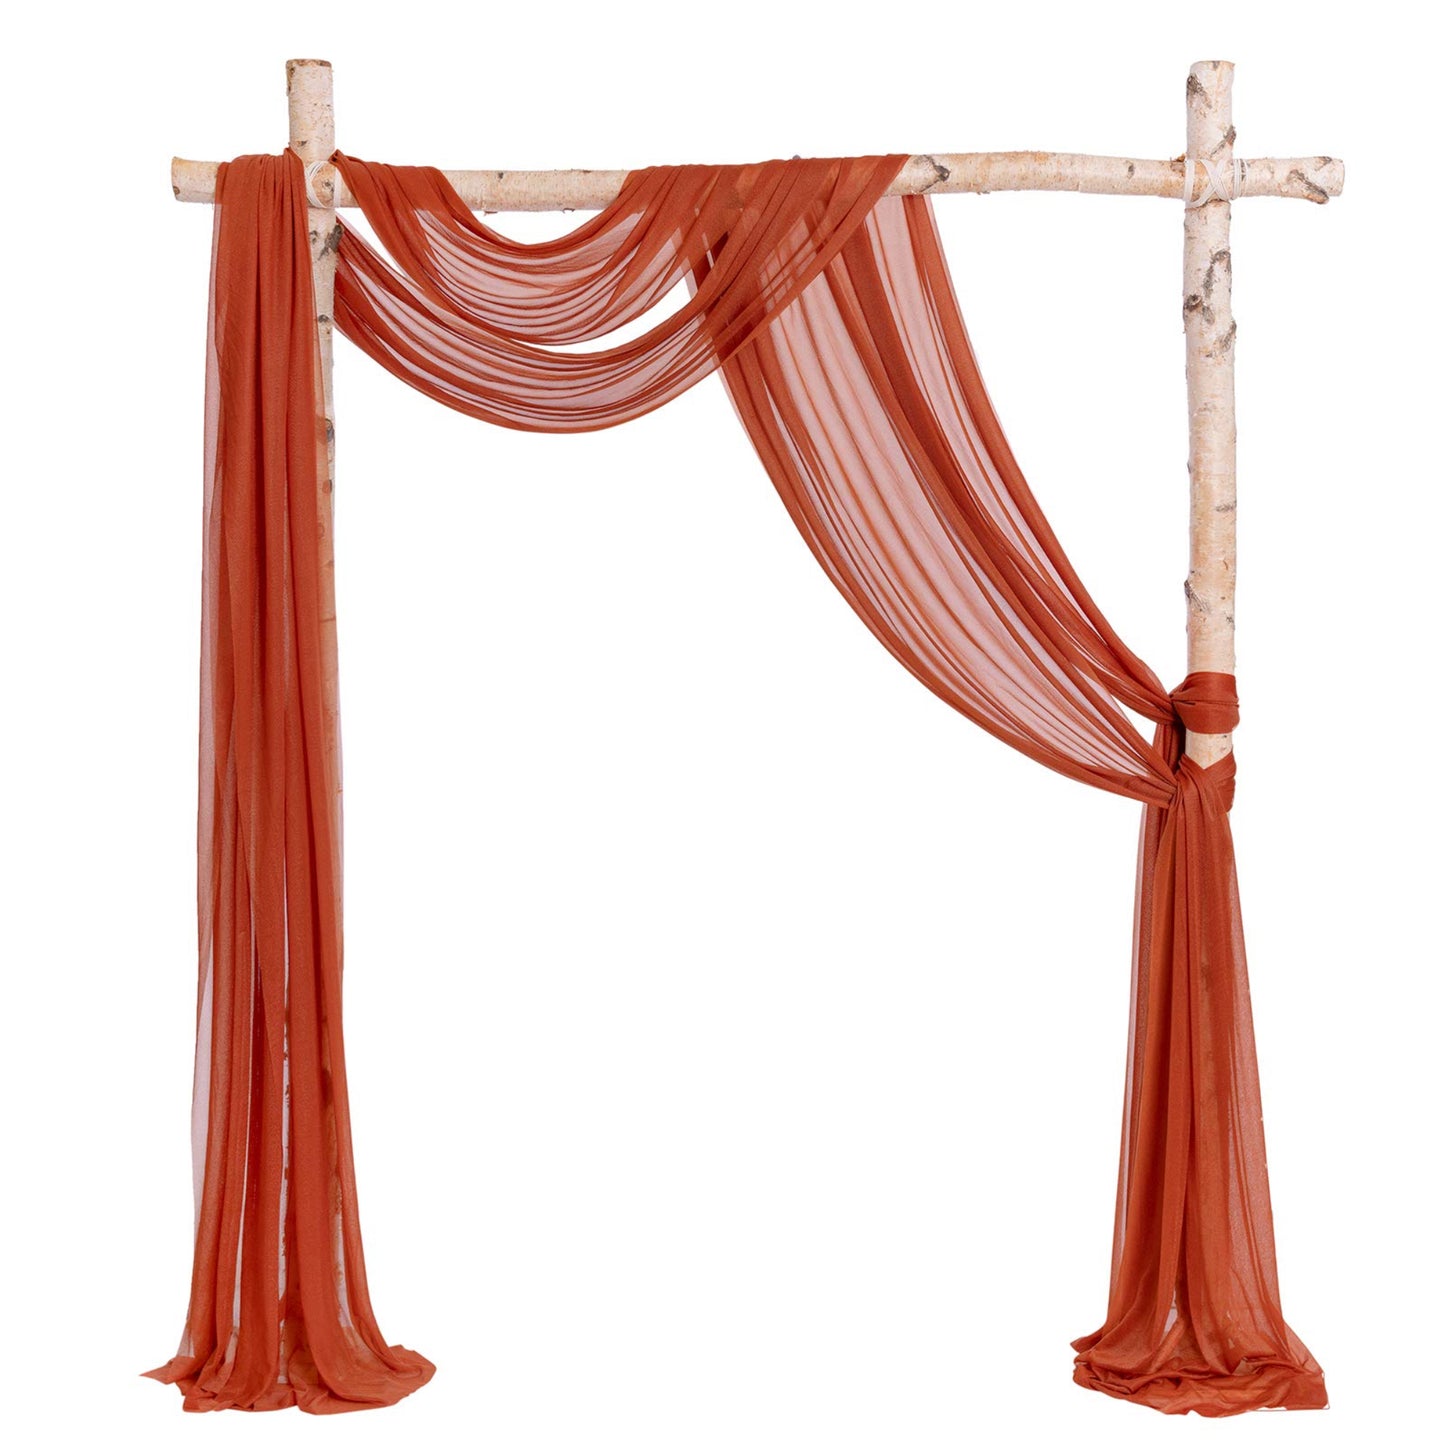 Elegant Sheer Voile Wedding Arch Draping Curtains (Set of 2)